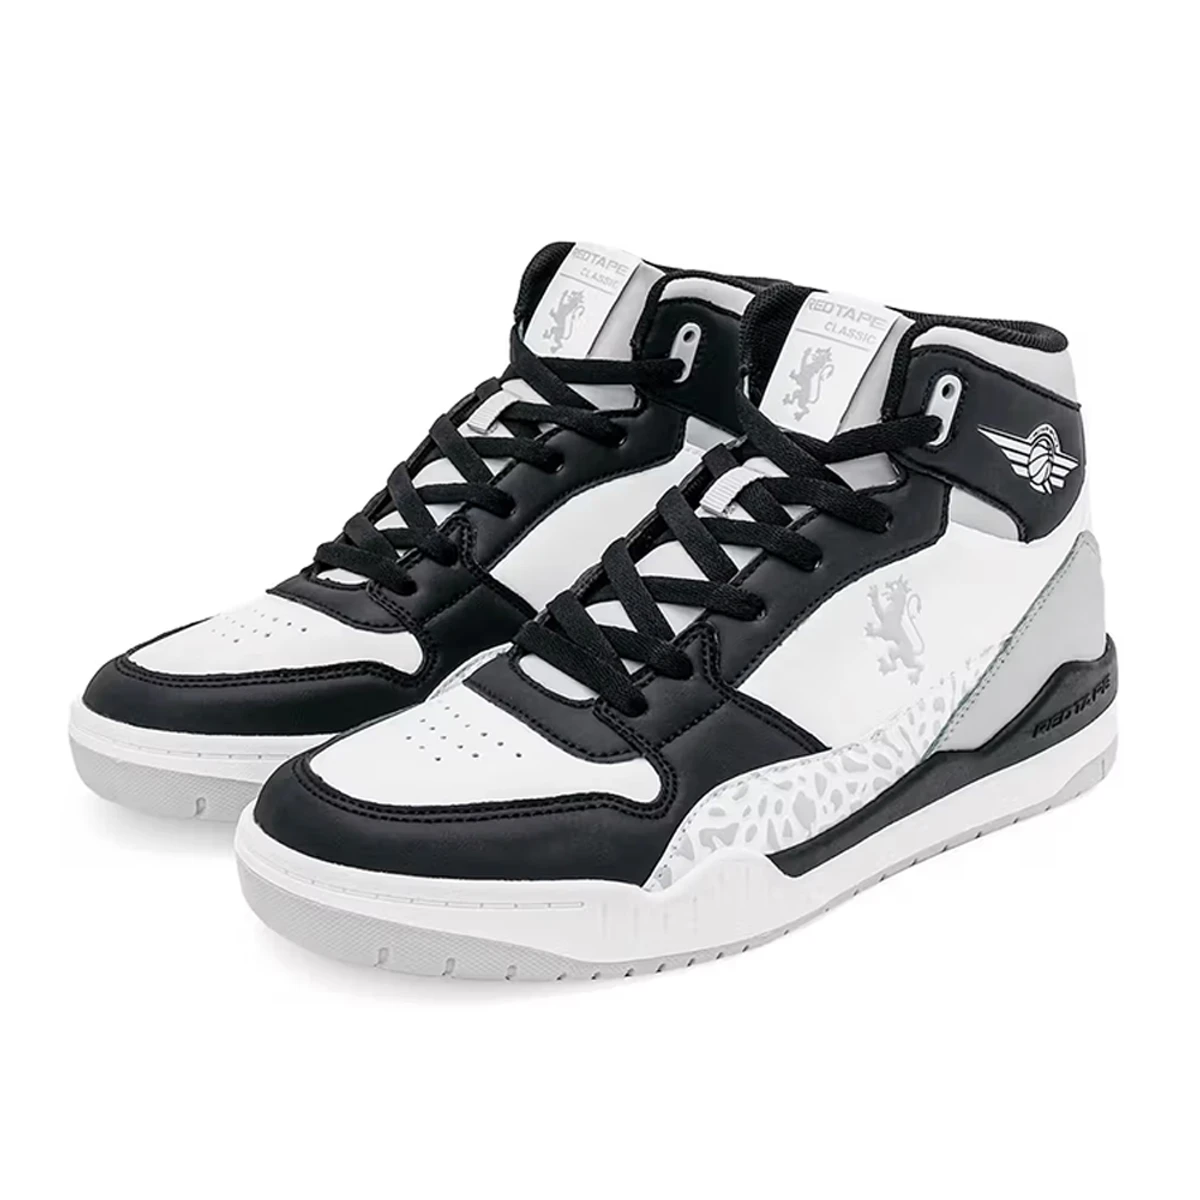 Red Tape RSL0316 Synthetic Mid-Top Printed Slip-Resistant Basics Sneakers for Men - Black and White